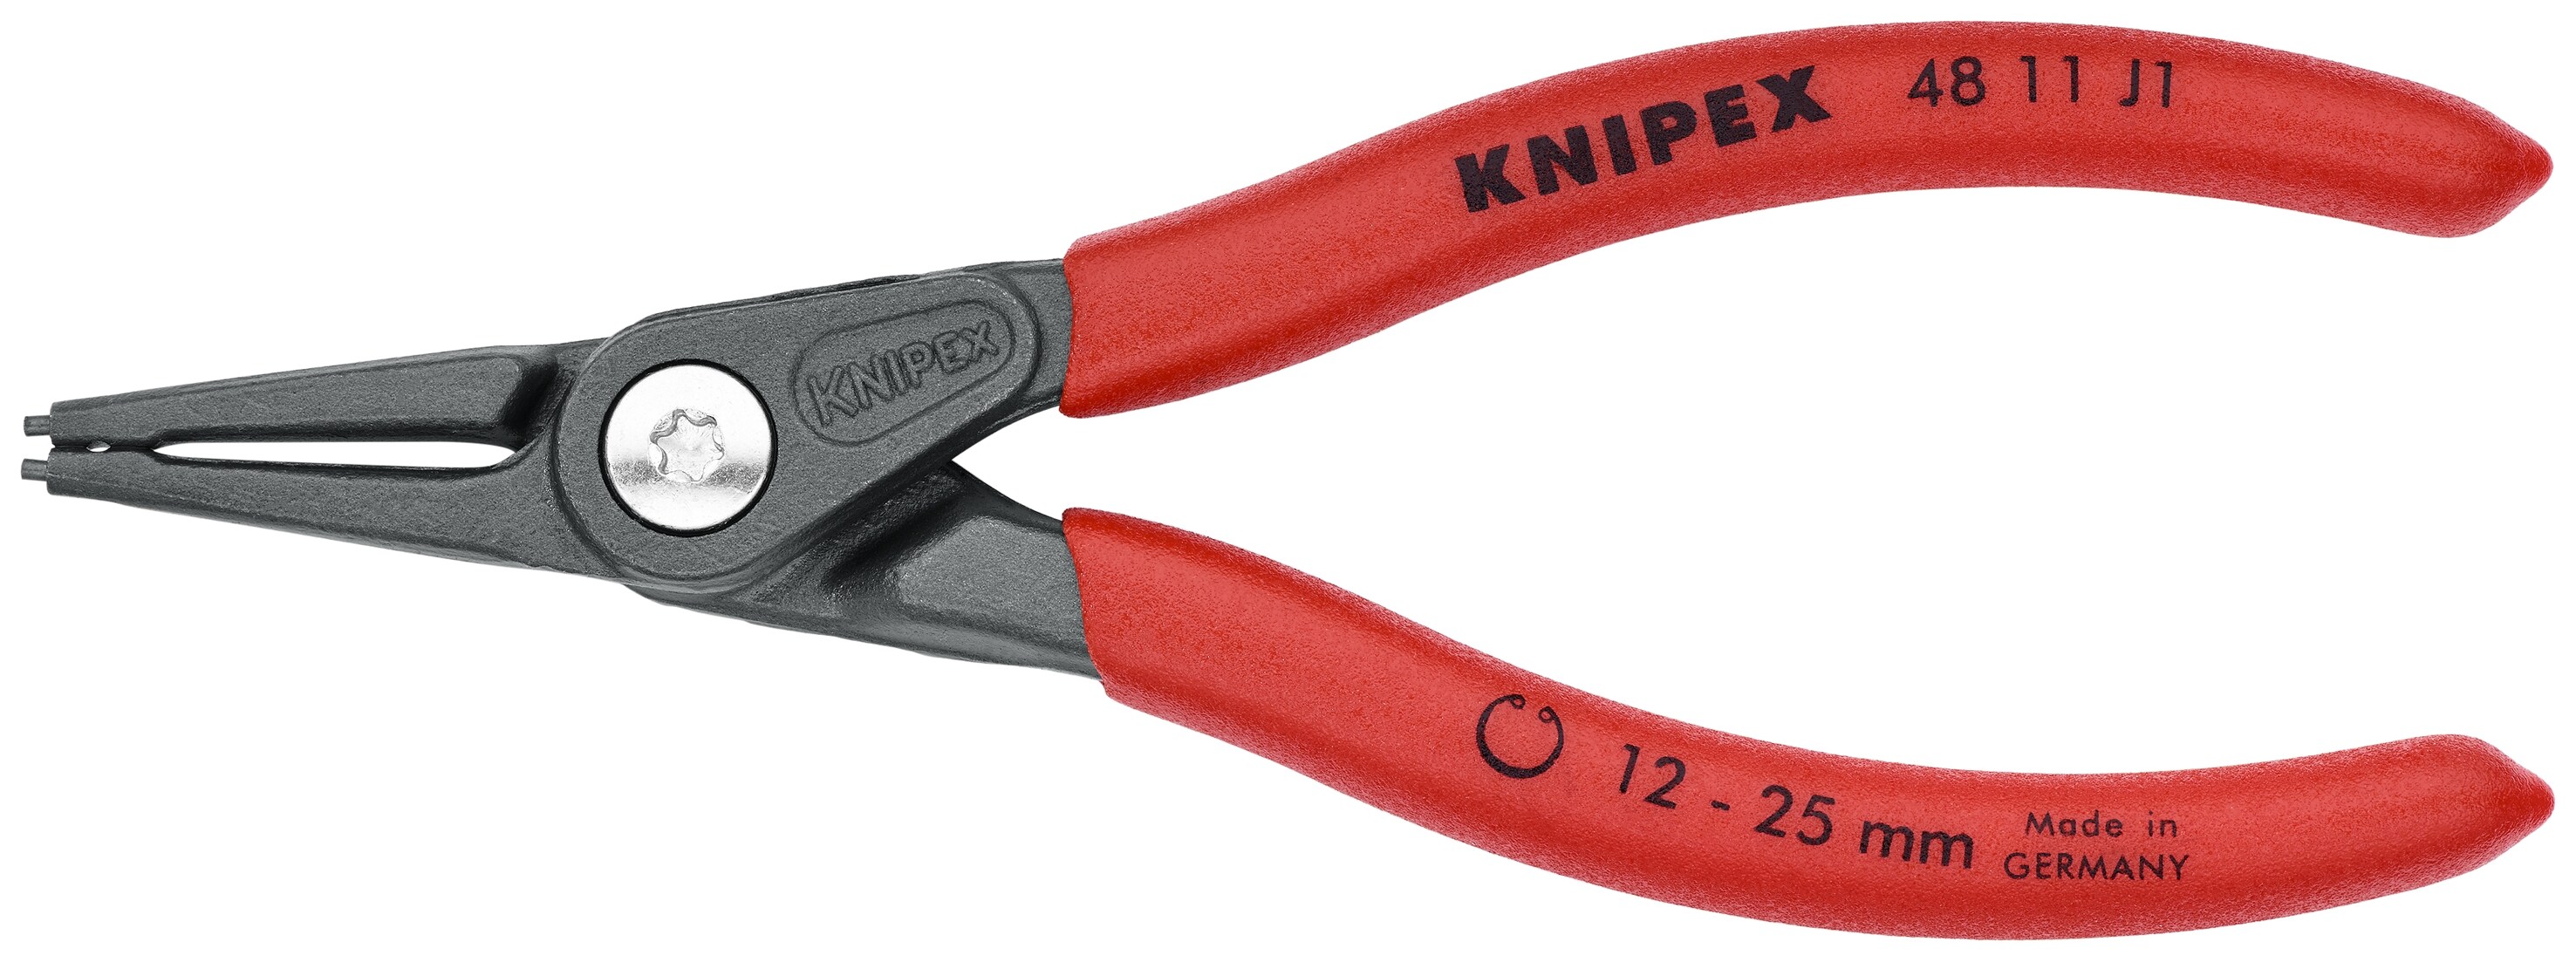 KNIPEX 6-Pack Snap Ring Plier Set with Hard Case in the Plier Sets